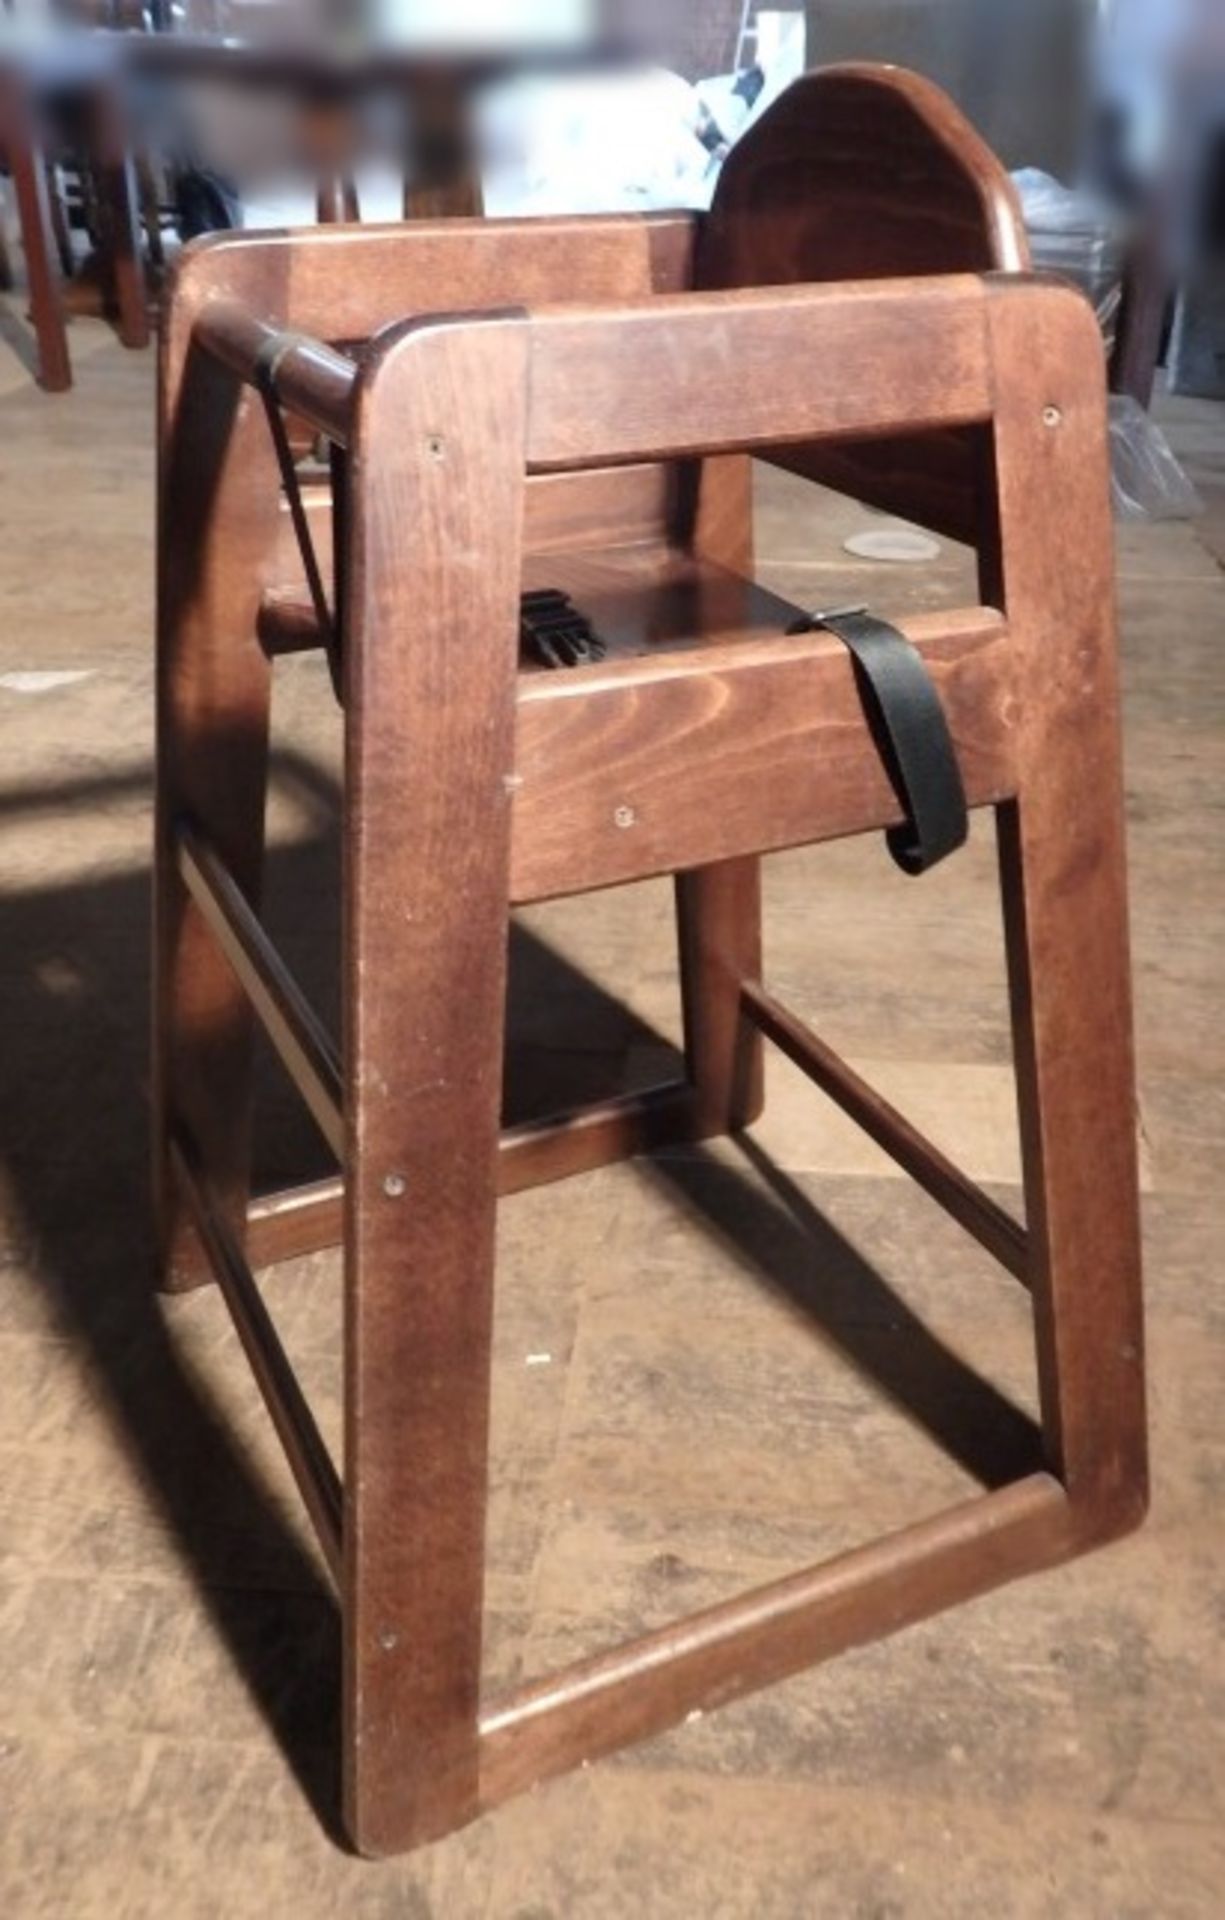 1 x Solid Wood Childs High Chair - All Recently Taken From A Bar & Restaurant Environment - - Image 5 of 8